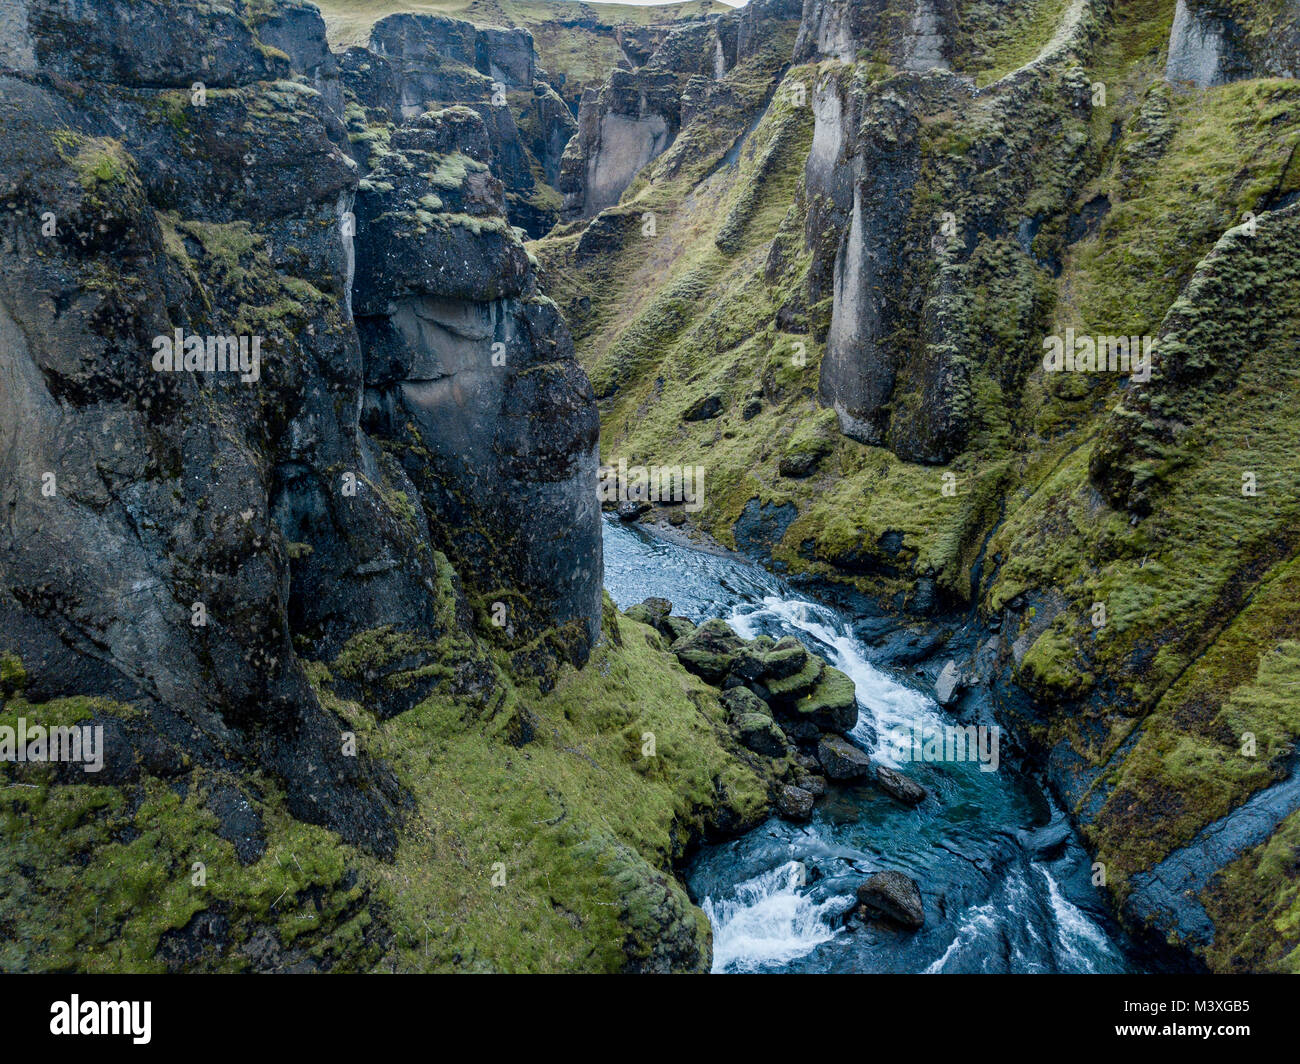 Fjadrargljufur Canyon, Iceland, South Iceland, Green stunning view one of the most beautiful canyon in Iceland Stock Photo